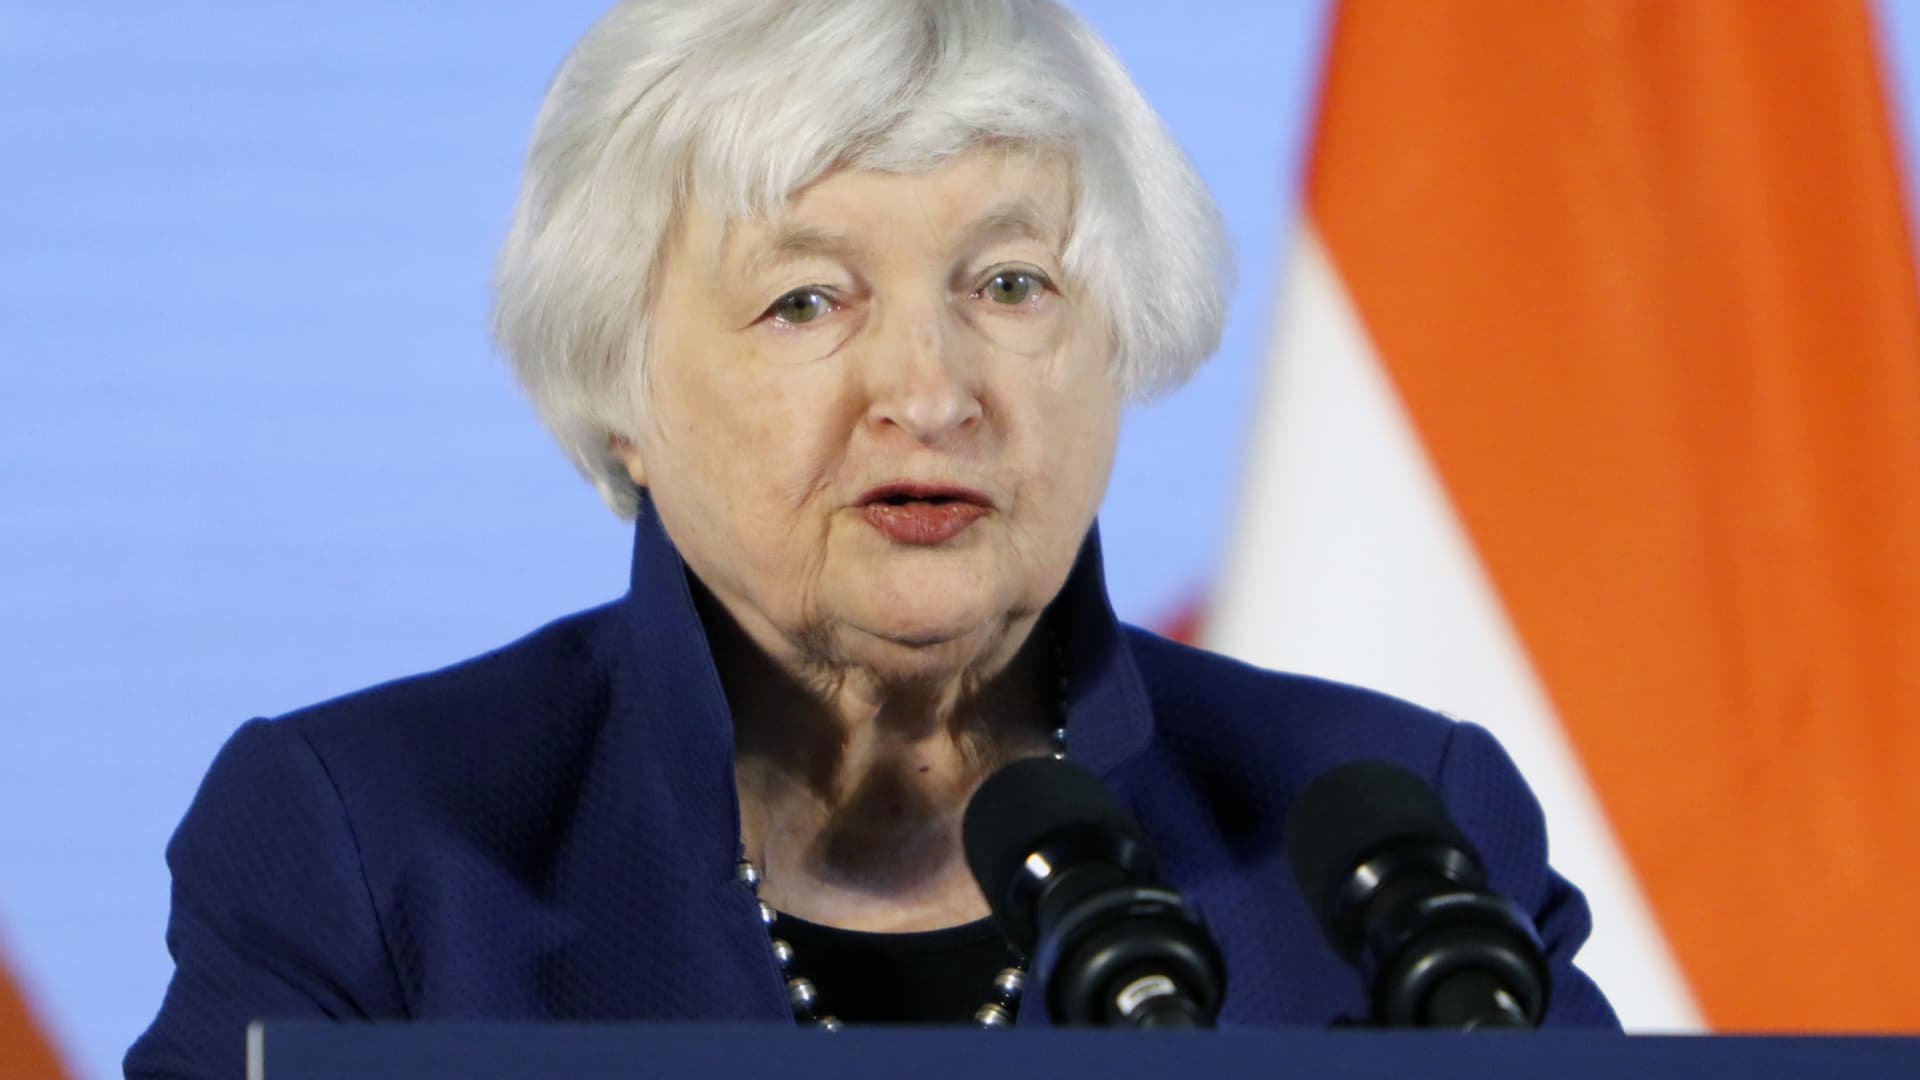 Janet Yellen, US Treasury secretary, speaks during a news conference at the Group of 20 (G-20) finance ministers and central bank governors meeting in Bengaluru, India, on Thursday, Feb. 23, 2023.